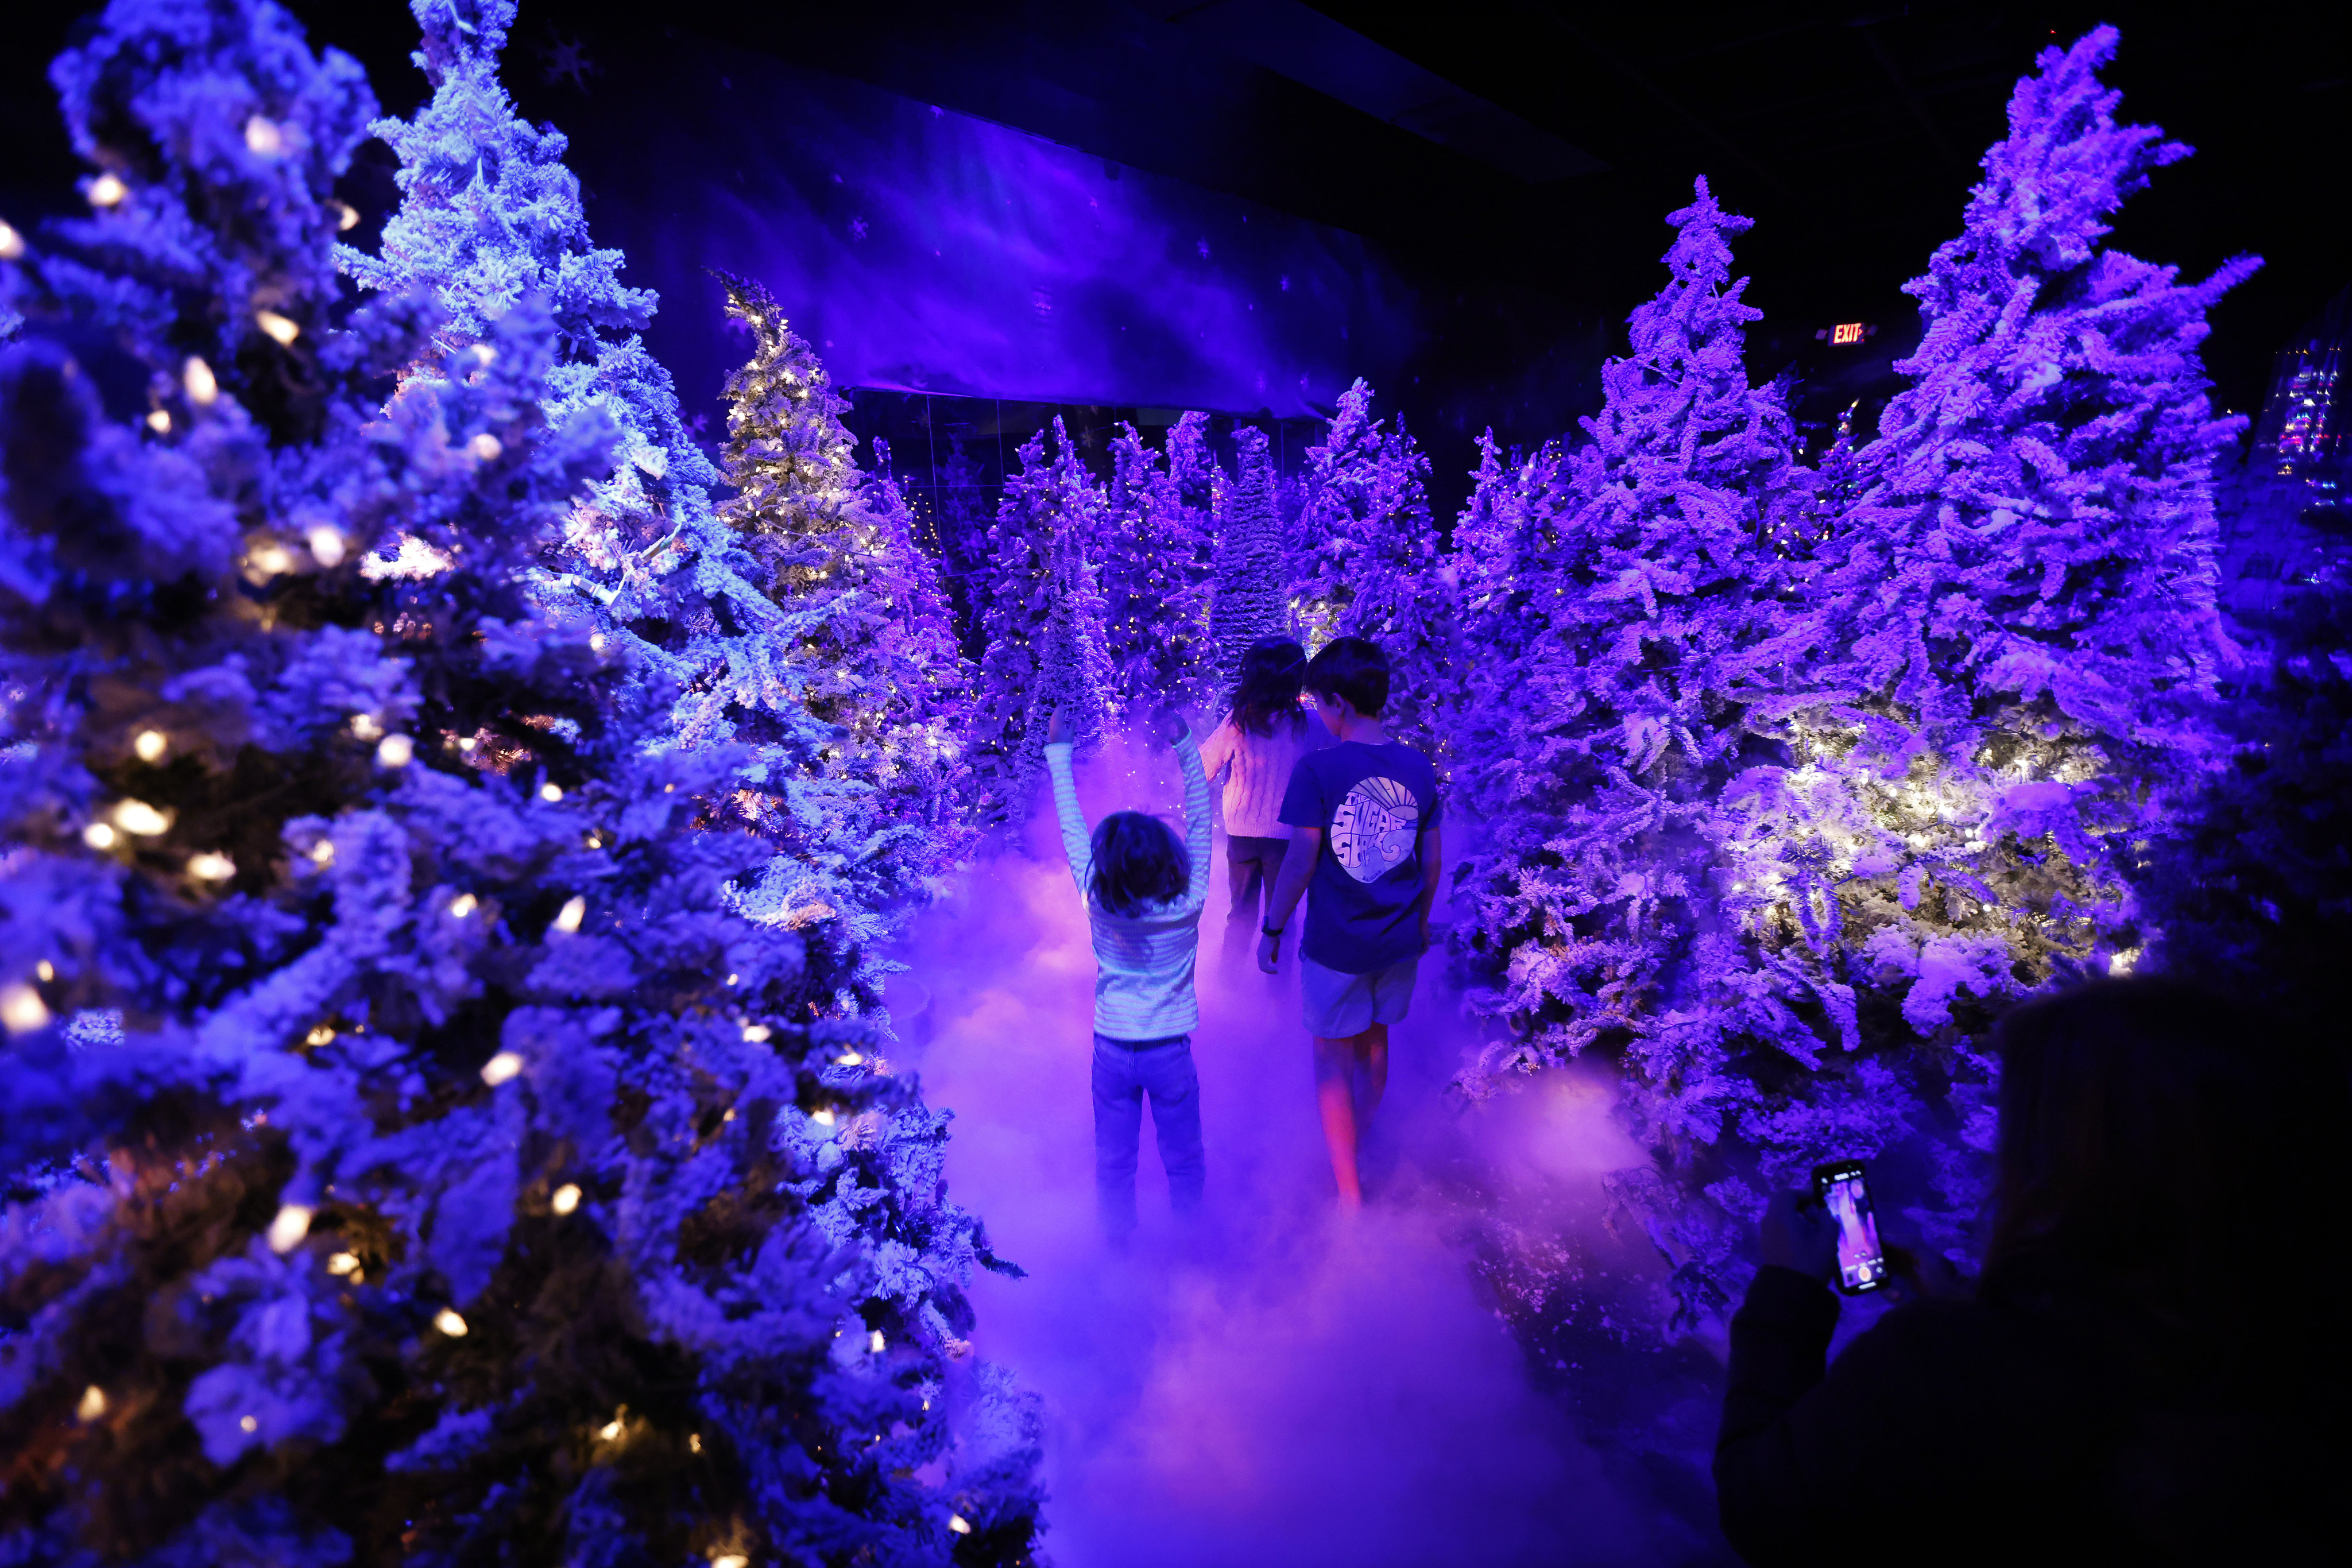 Tired of the heat? Think of a bigger, brighter Christmas tree at Galleria  Dallas